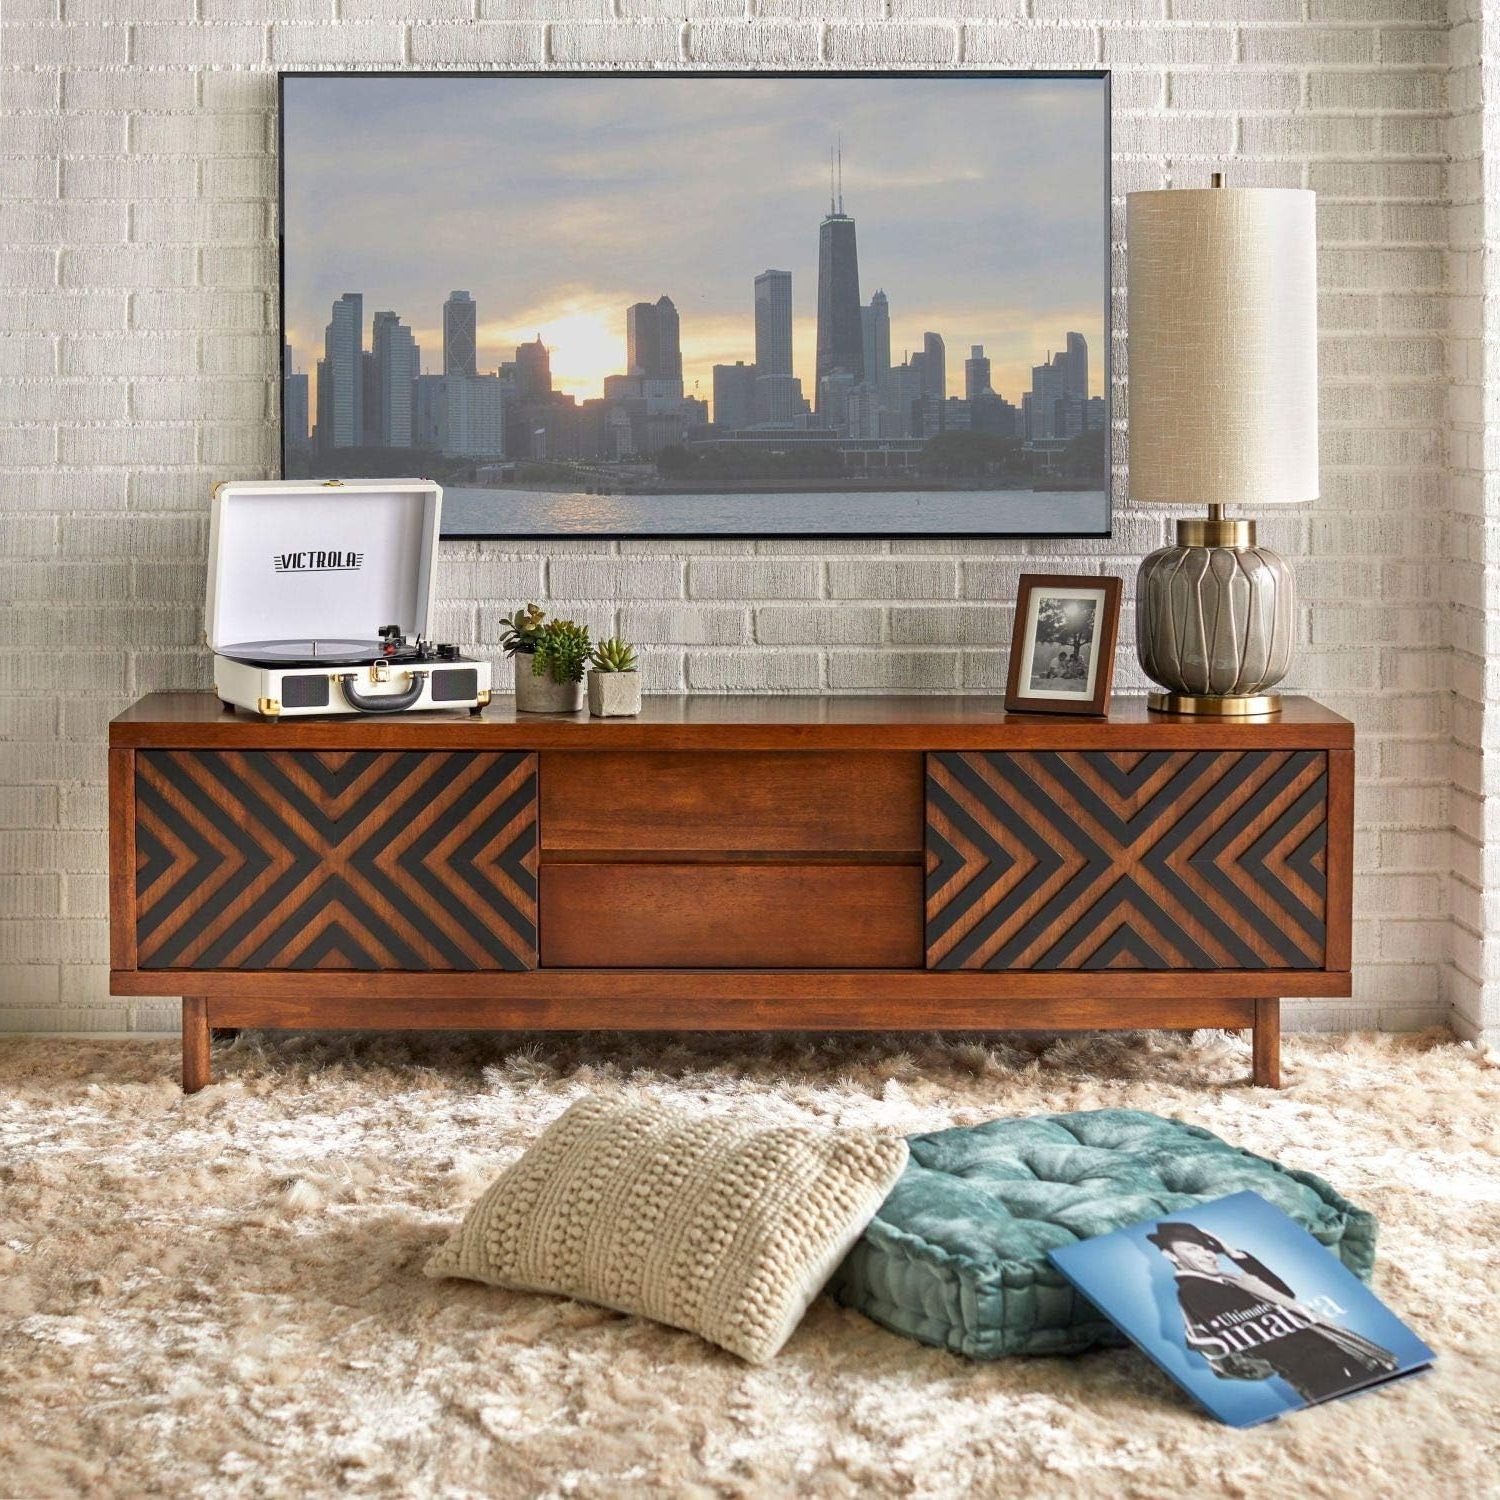 Mid Century Entertainment Centers Throughout Well Known Amazon: Mid Century Modern Tv Stand Provides Retro Style And (View 3 of 15)